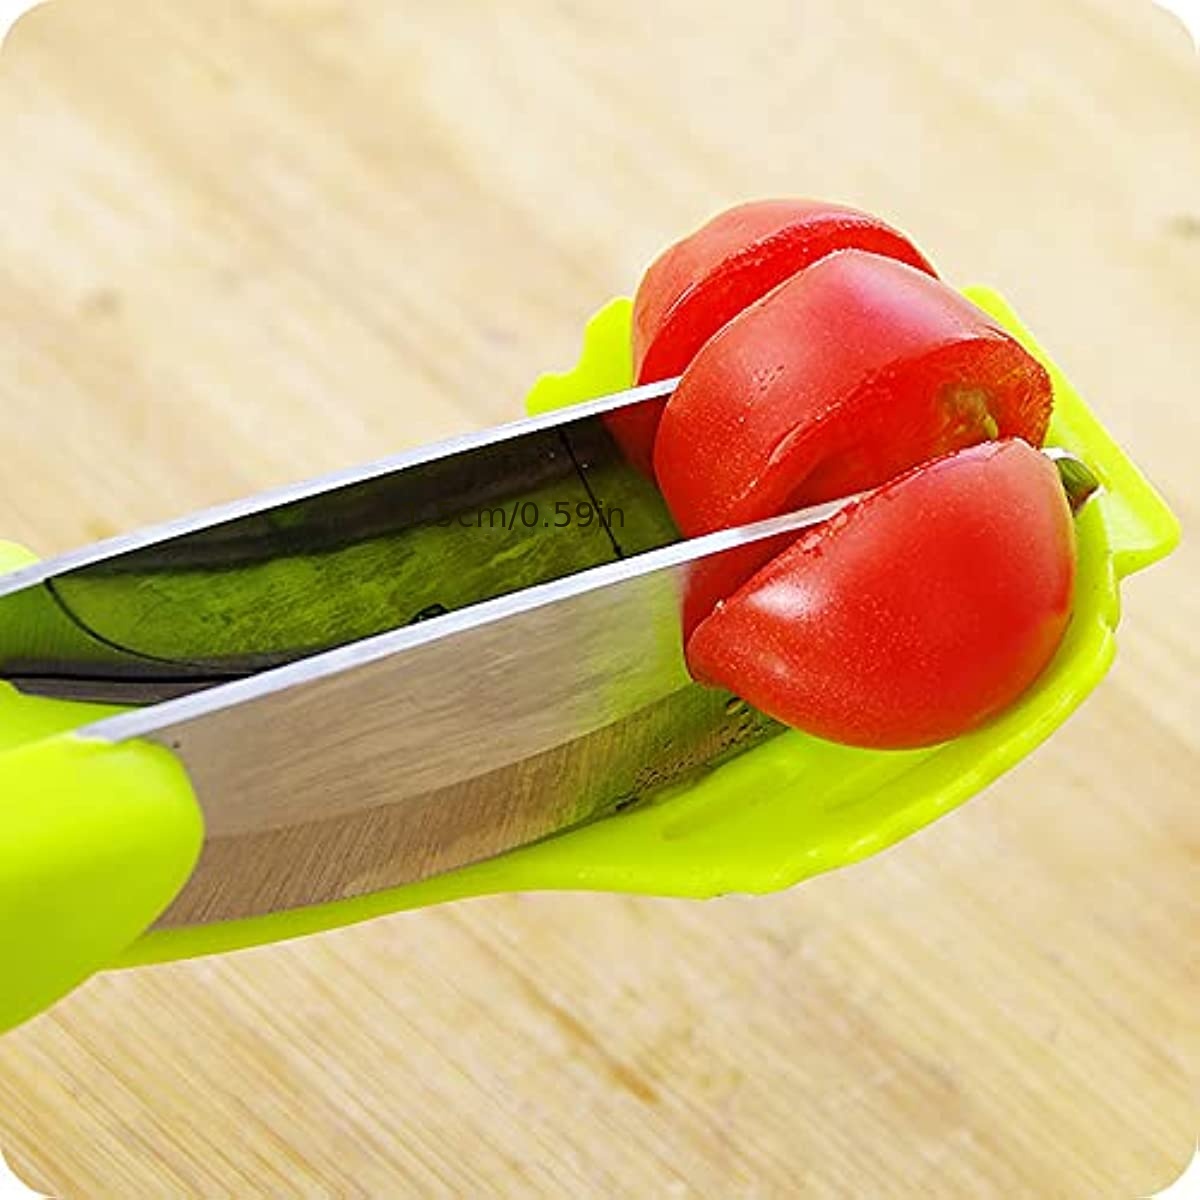 Salad Chopper Scissors Lettuce Chopper Stainless Steel Salad Cutting Tool  Salad Scissors for Chopped Salad for Cucumbers Lettuce